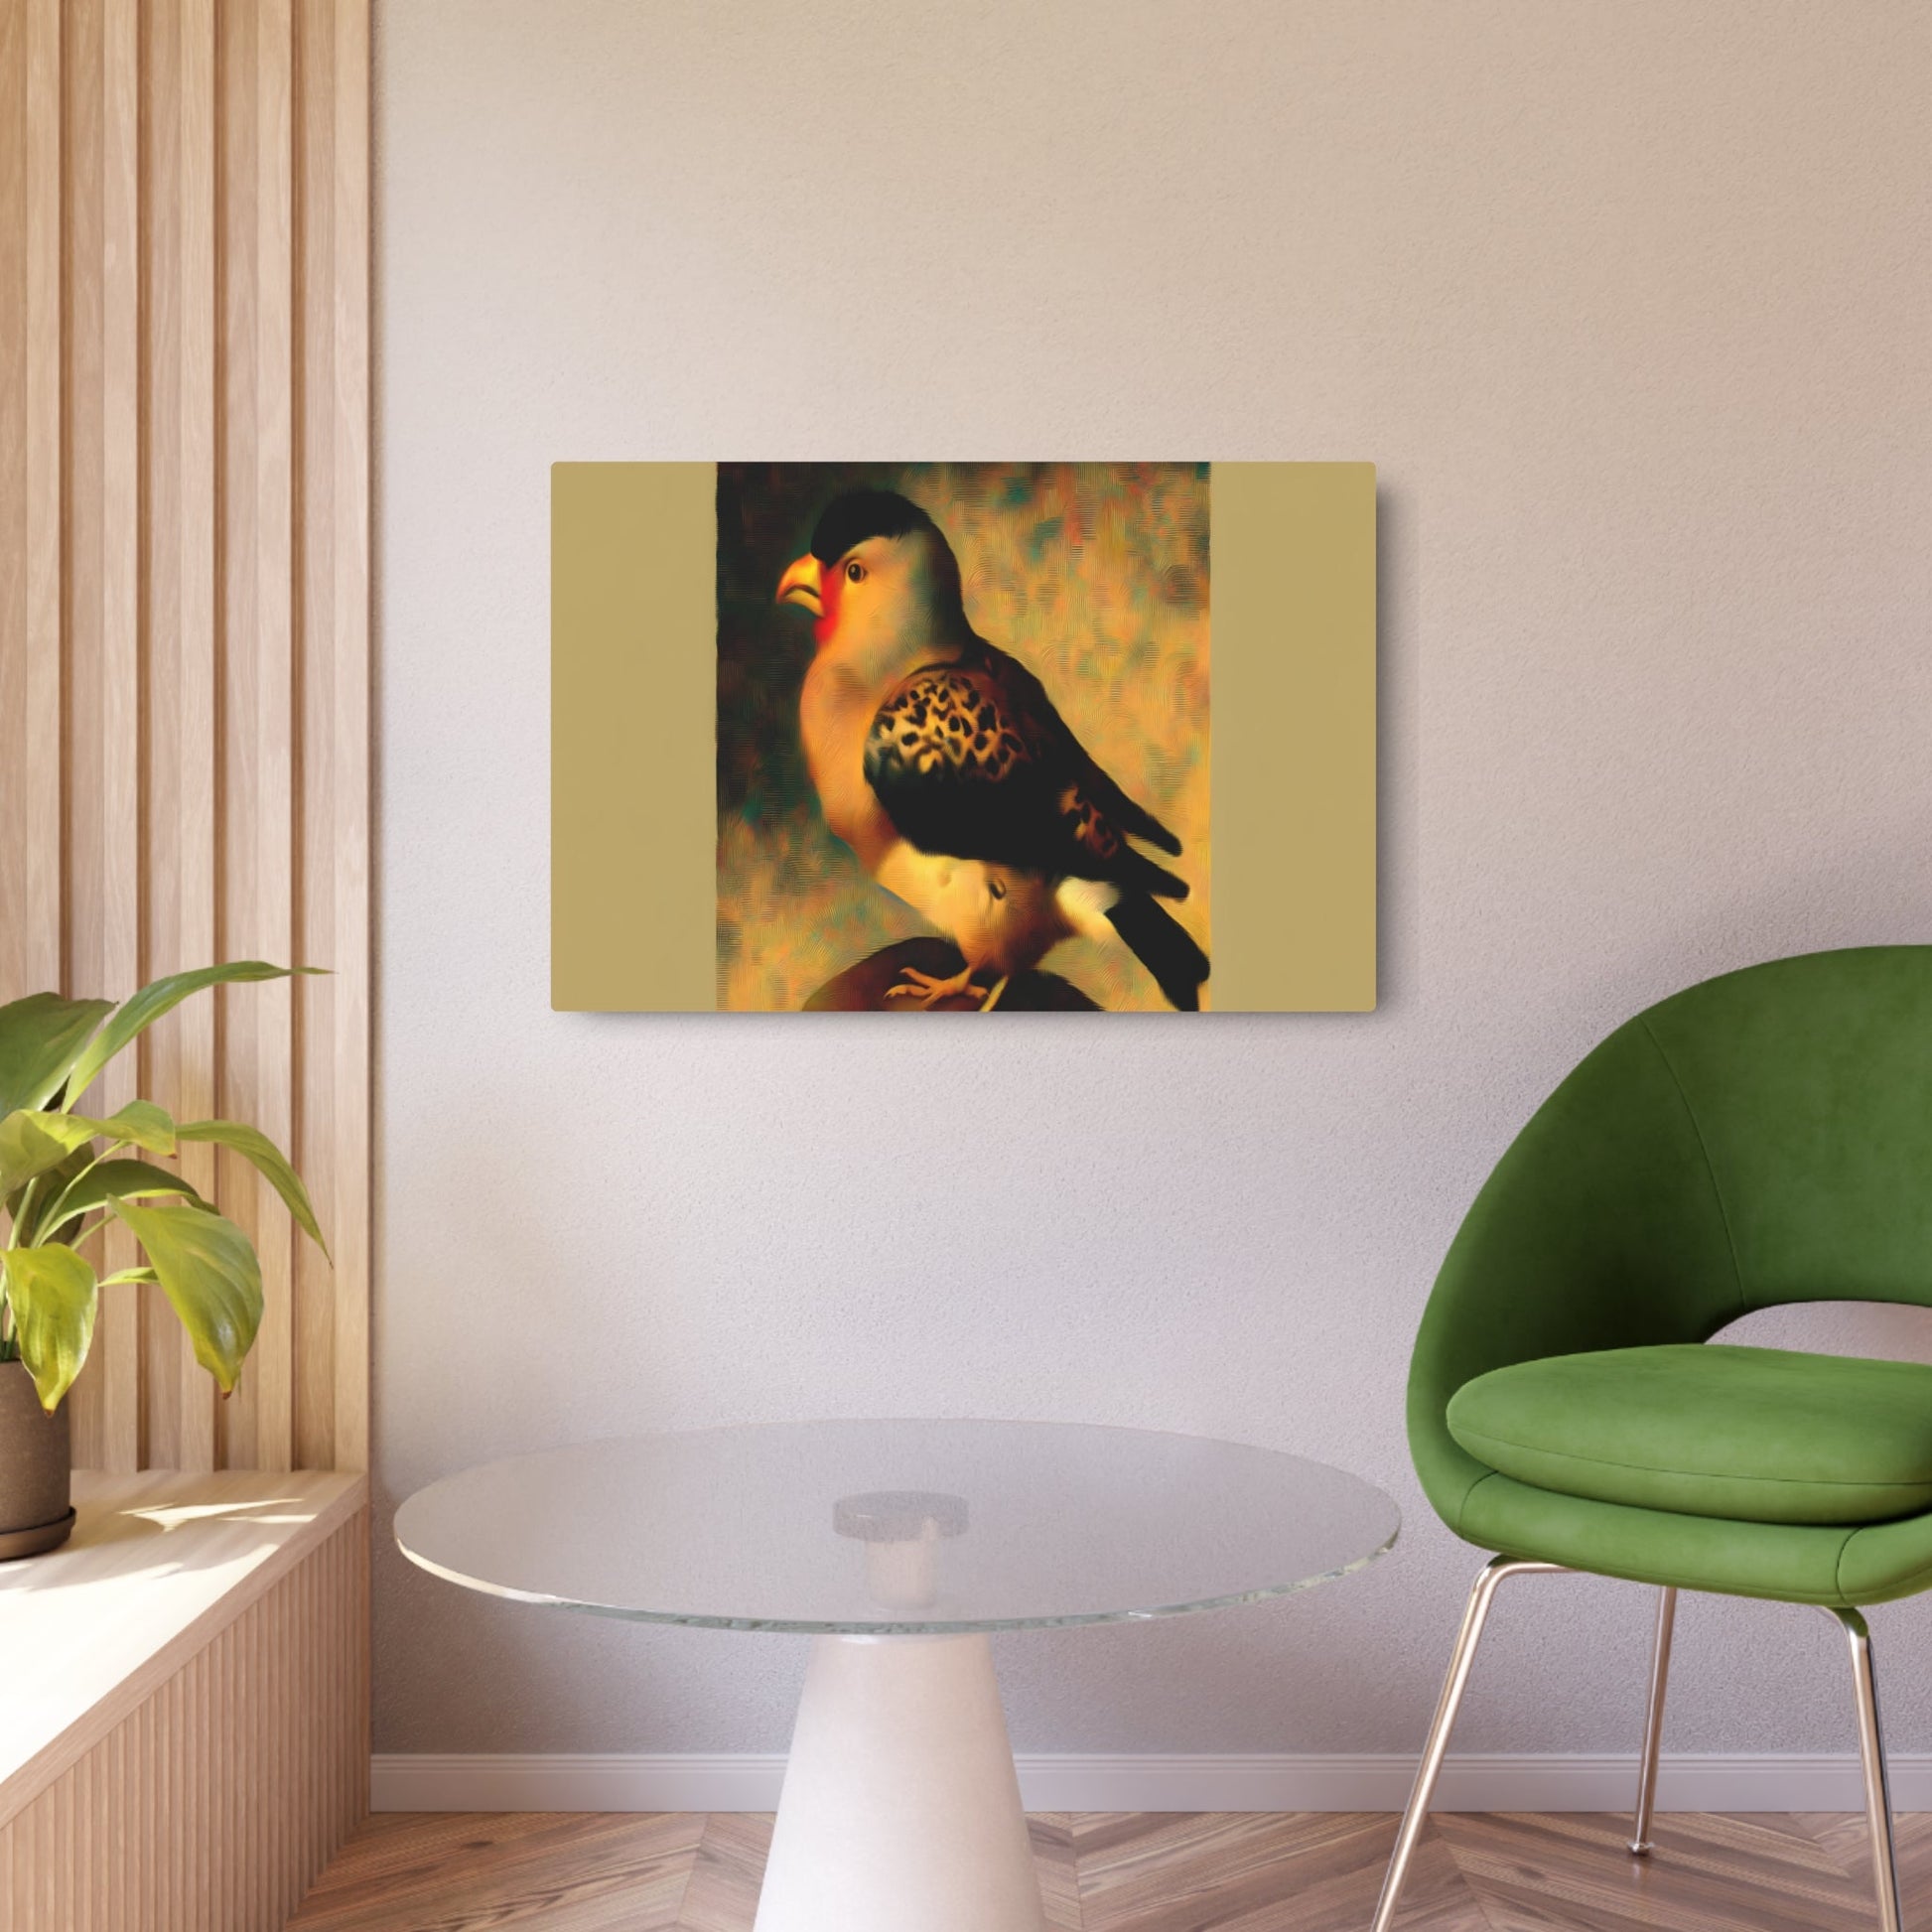 Metal Poster Art | "Neoclassicism Western Art Style Masterpiece - Bird Inspired Painting Influenced by Jacques-Louis David and Jean-Auguste-Dominique Ingres - Metal Poster Art 36″ x 24″ (Horizontal) 0.12''